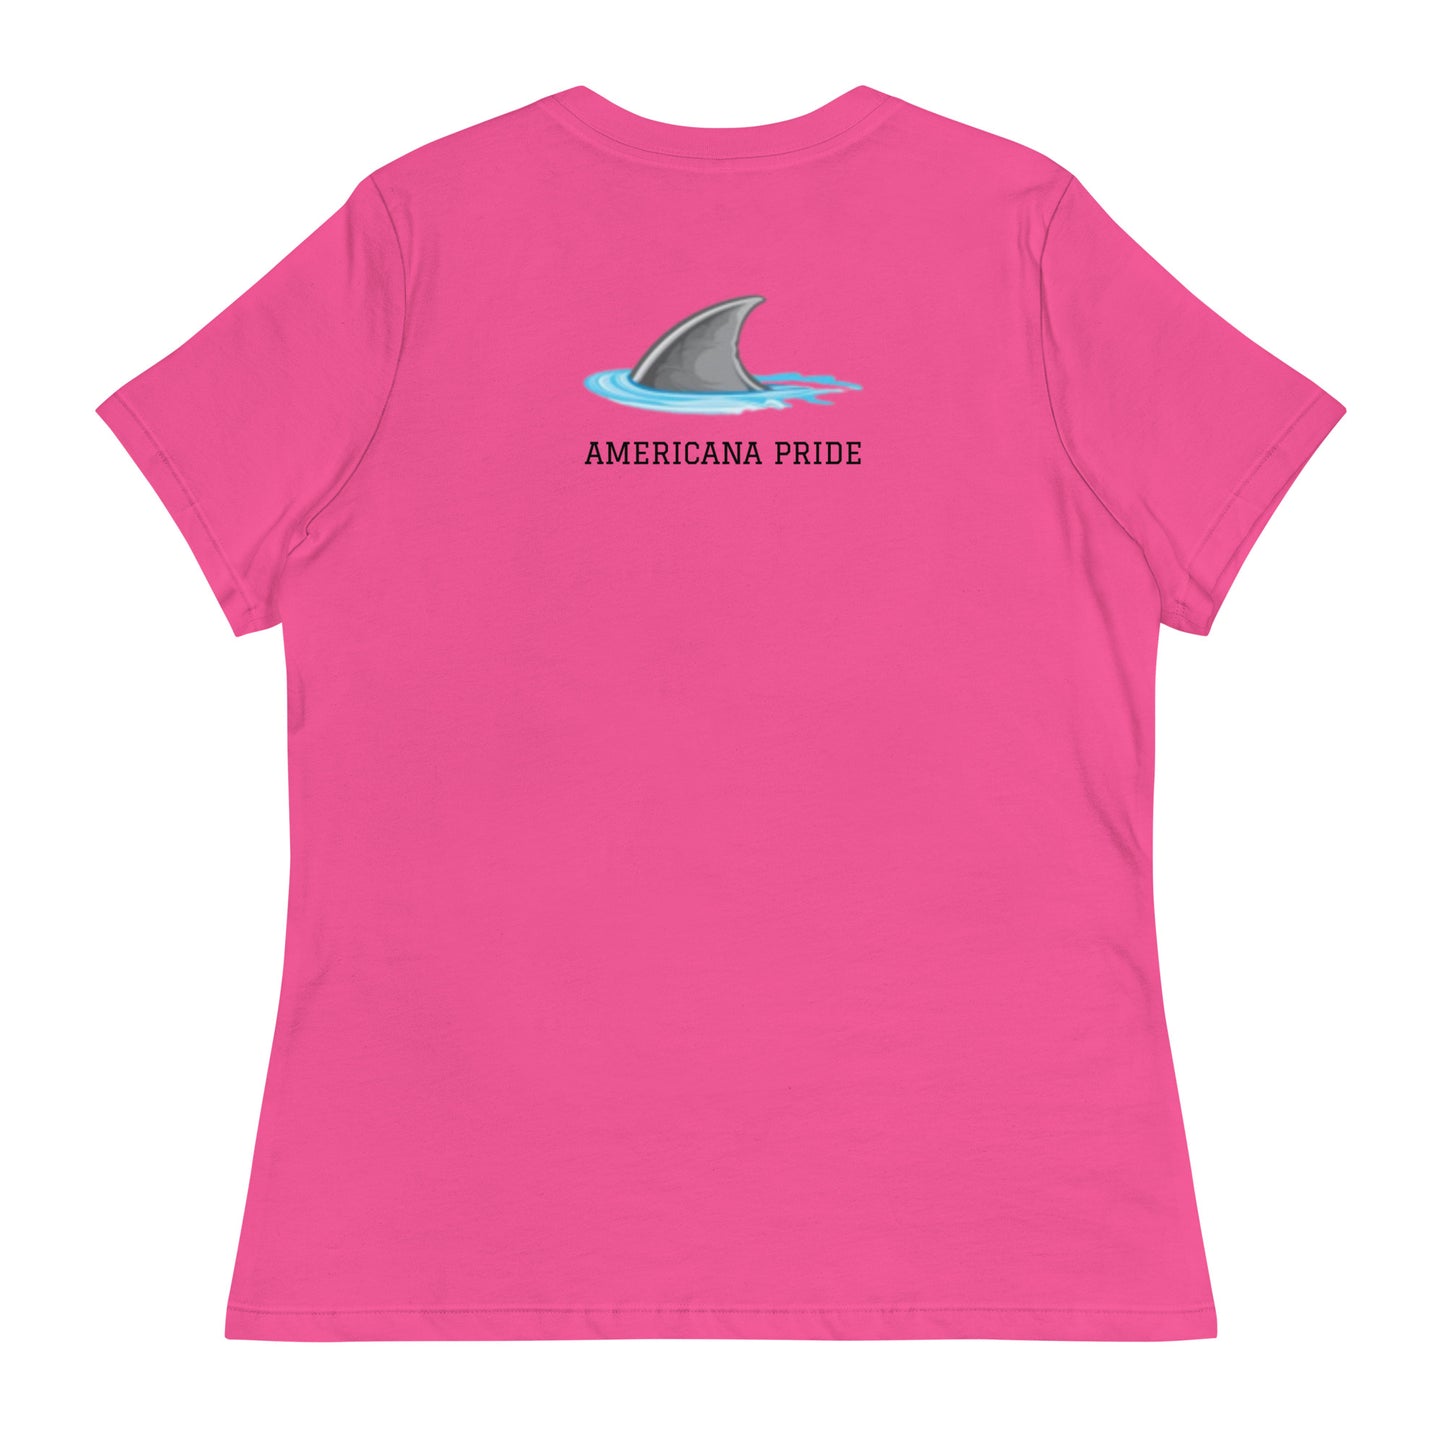 Are you the SHARK or the minnow?  women's tee (black lettering)